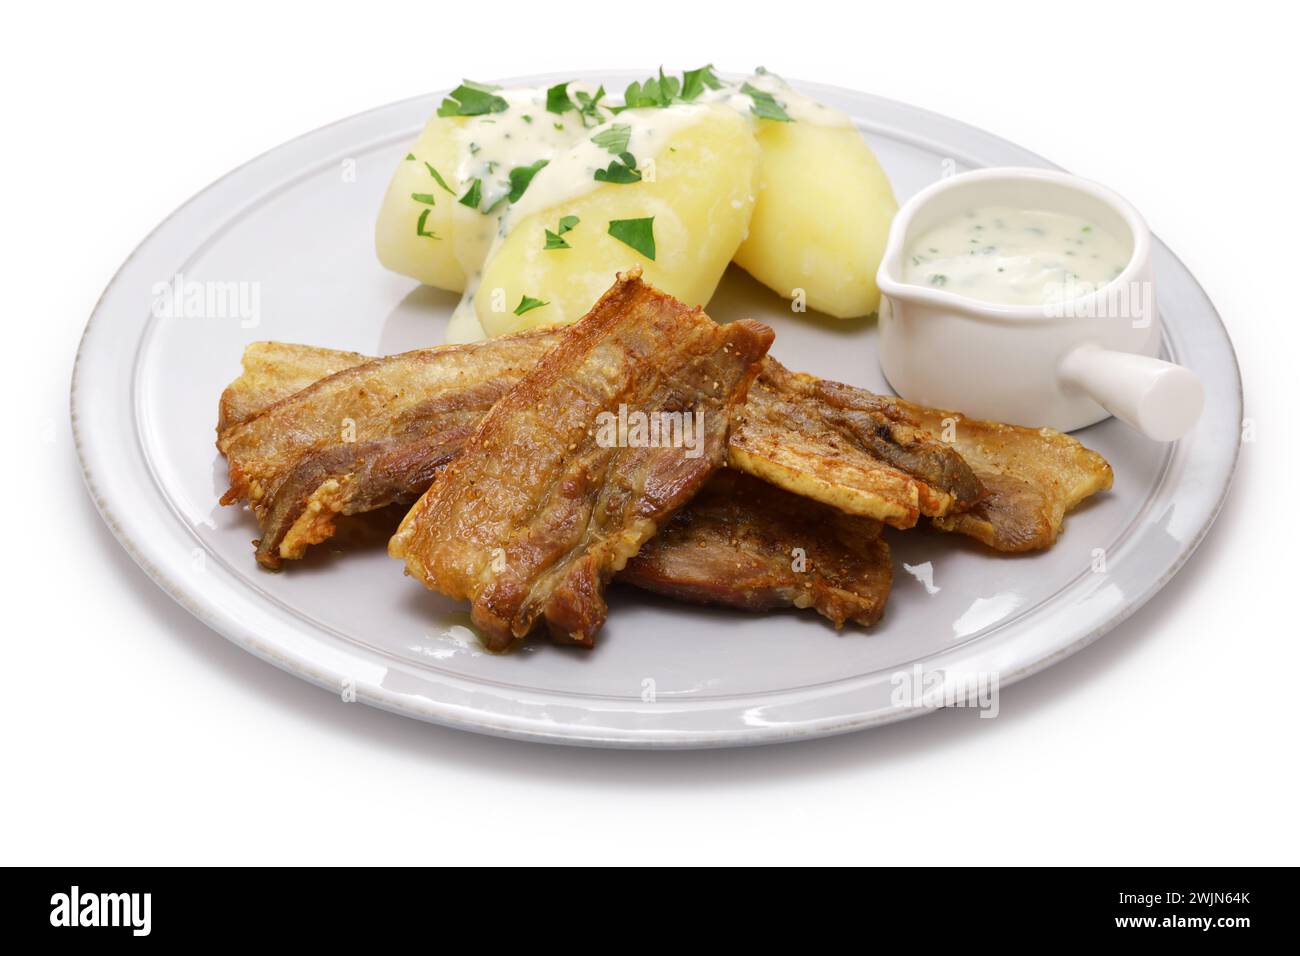 'Stegt flæsk med persillesovs' (sliced pork belly with skin on and fried, served with parsley sauce and boiled potatoes). Denmark's national food. Stock Photo